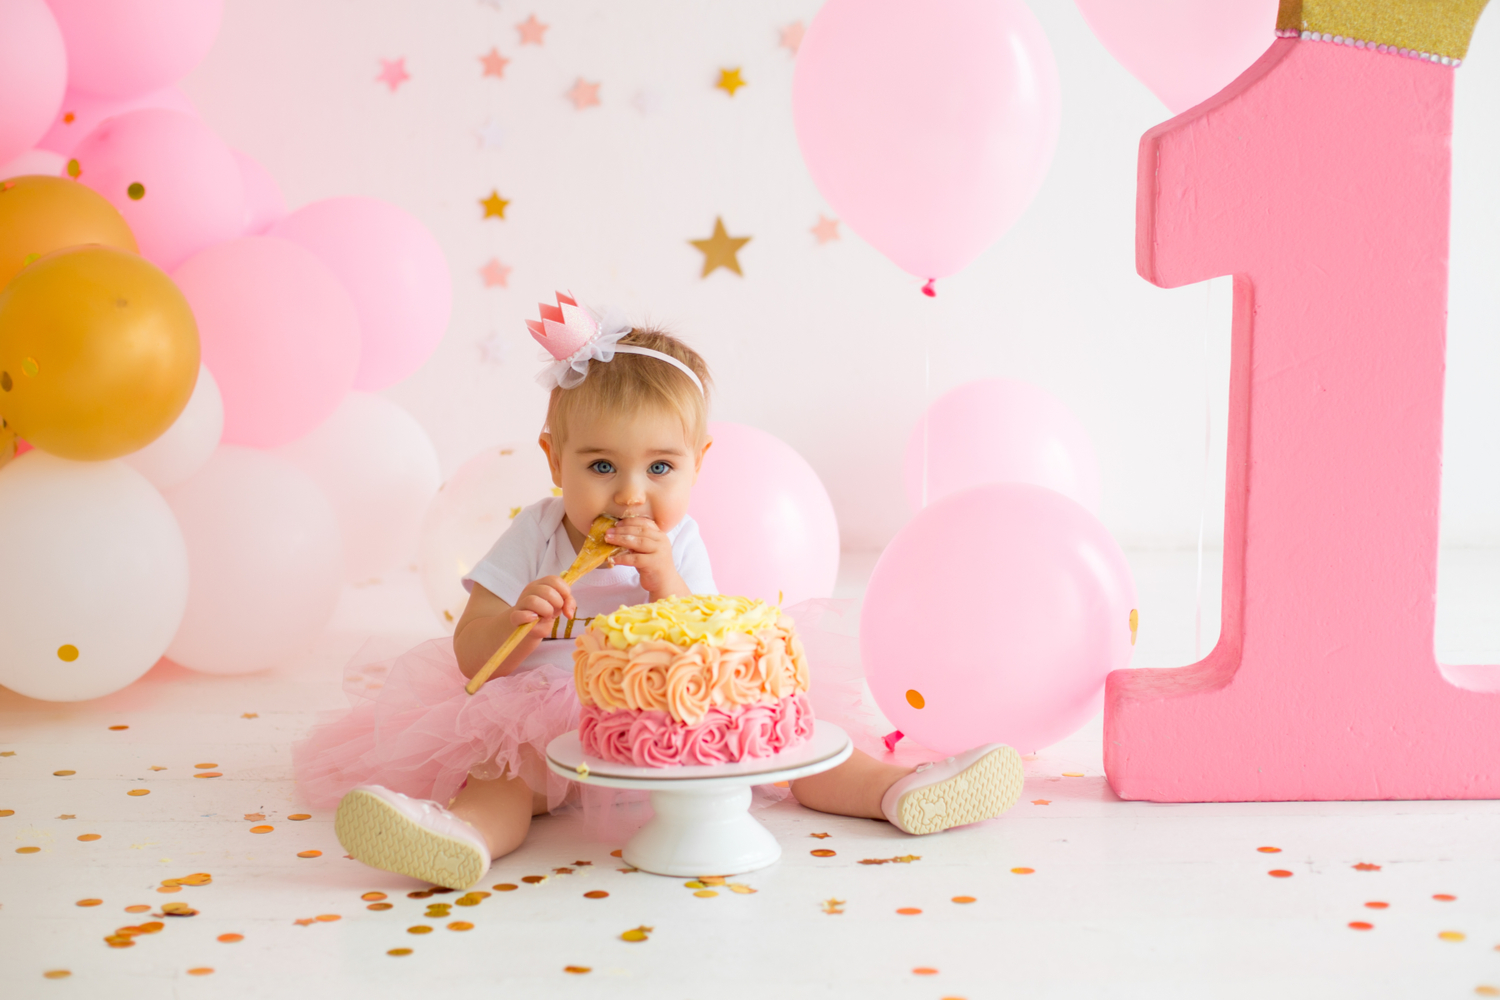 227,933 Small Cake Images, Stock Photos & Vectors | Shutterstock